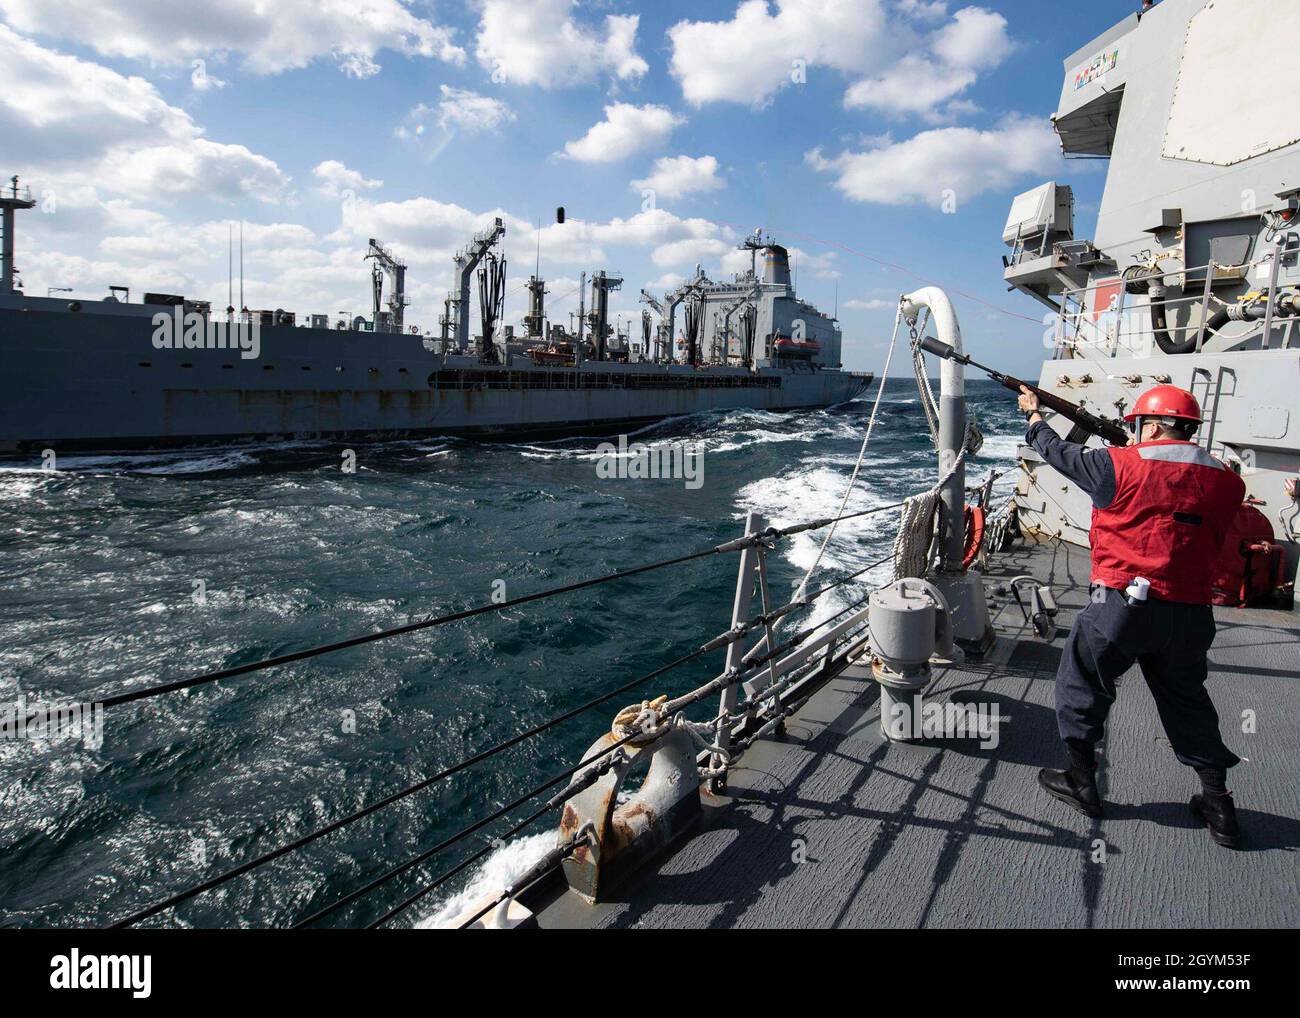 ARABIAN GULF (Jan. 27, 2020) - Fire Controlman 2nd Class Brandon Nguyen, fires a shot line to the fleet replenishment oiler USNS Walter S. Diehl (T-AO-193) during a replenishment-at-sea evolution aboard the guided-missile destroyer USS Carney (DDG 64), Jan. 27, 2020. Carney is deployed to the U.S. 5th Fleet area of operations in support of naval operations to ensure maritime stability and security in the Central Region, connecting the Mediterranean and Pacific through the Western Indian Ocean and three strategic choke points. (U.S. Navy photo by Mass Communication Specialist 1st Class Fred Gra Stock Photo